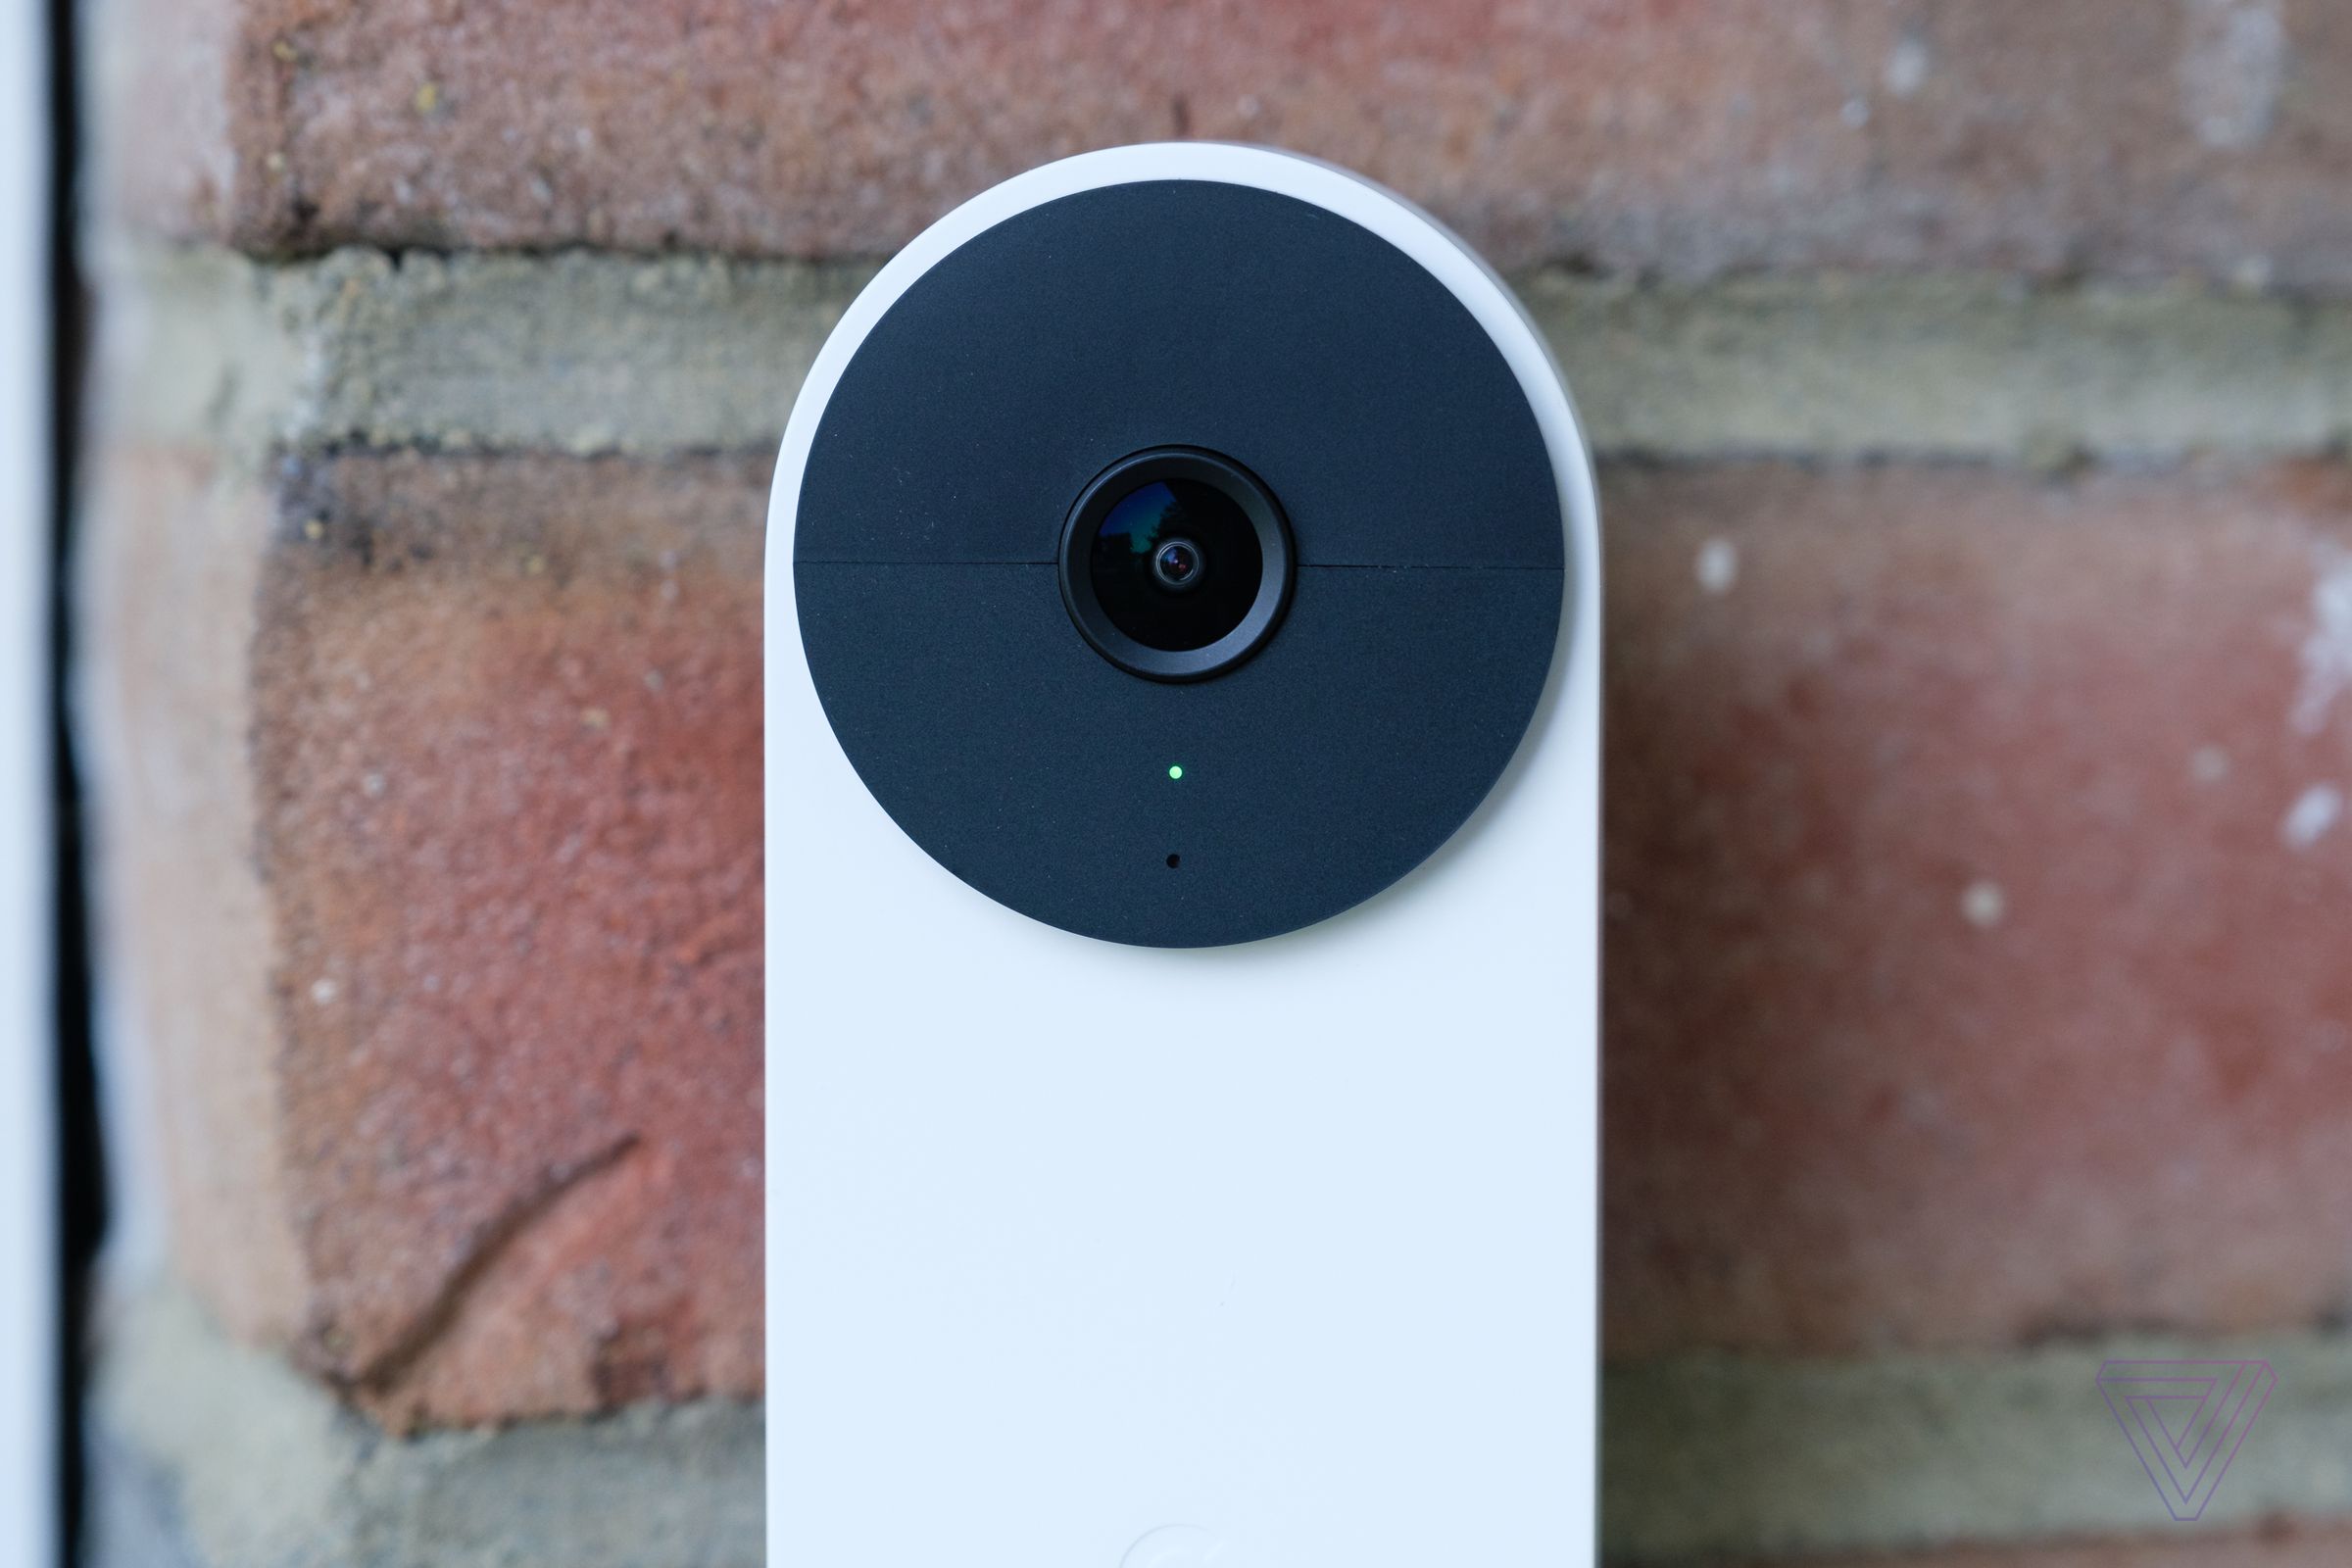 The Nest Doorbell’s camera is lower resolution than the Nest Hello from 2018, but image quality is generally good in most scenarios.